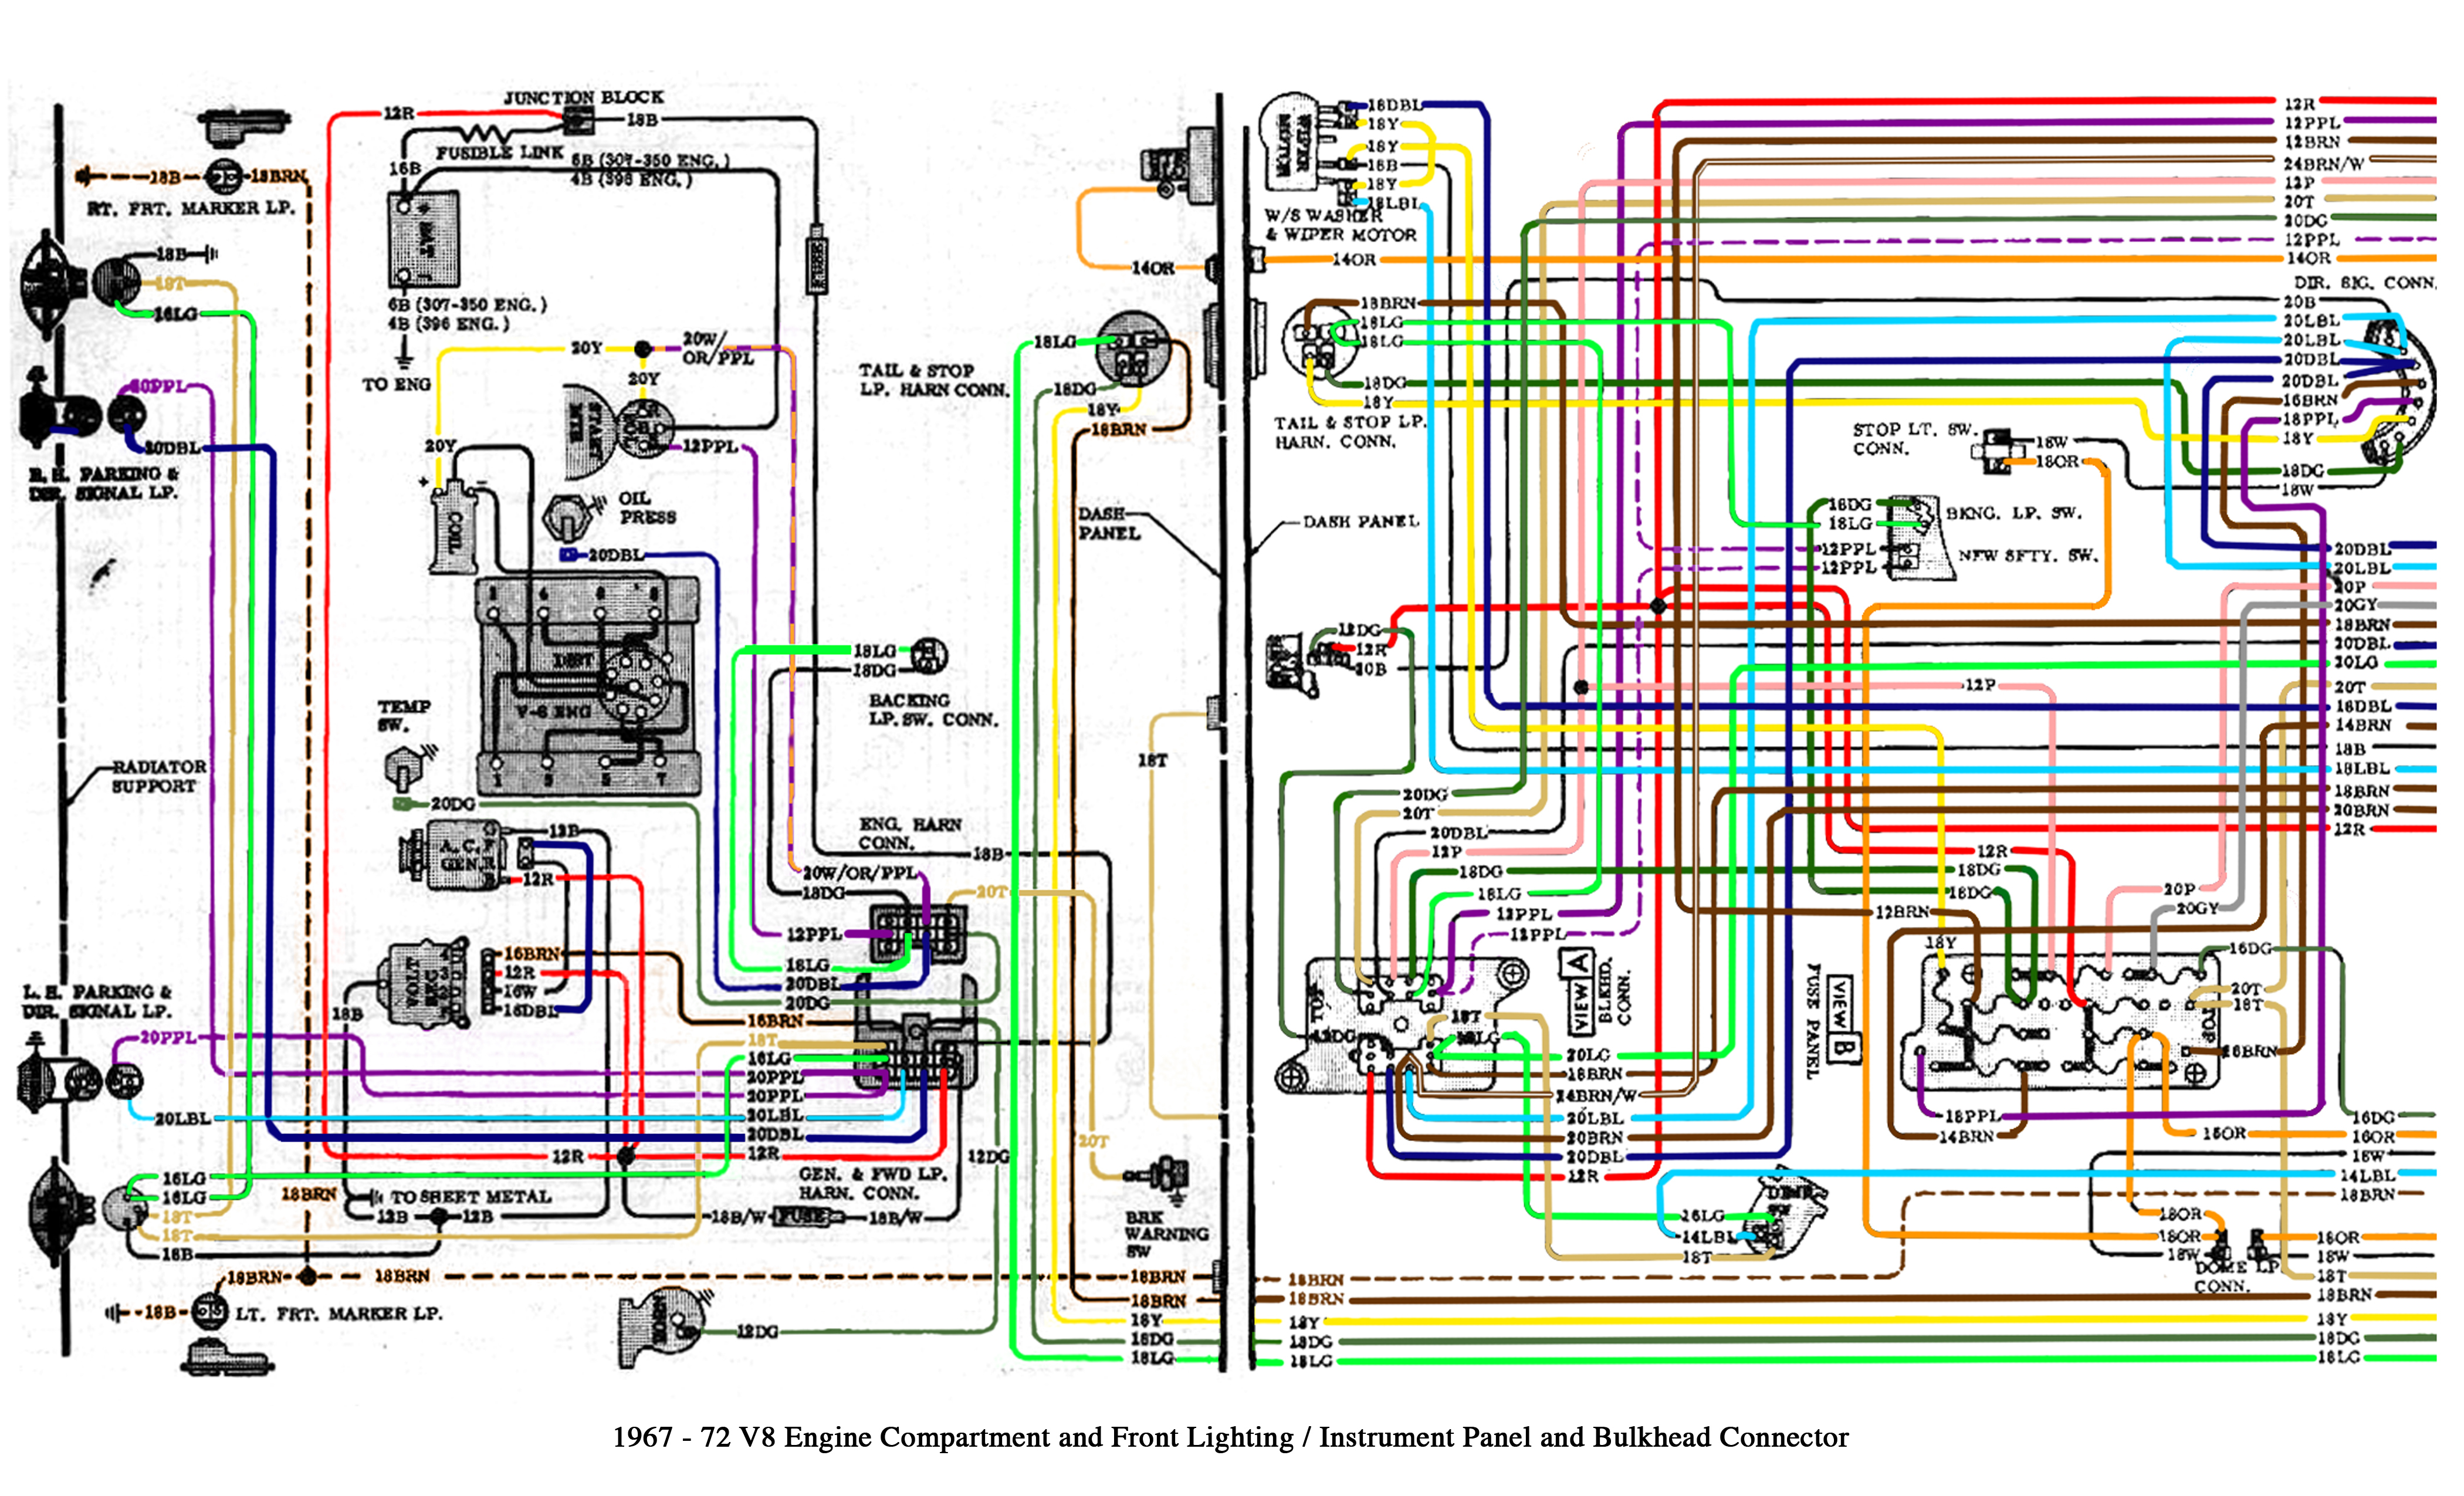 Color Wiring Diagram Finished - The 1947 - Present Chevrolet &amp;amp; Gmc - 1972 Chevy Truck Wiring Diagram